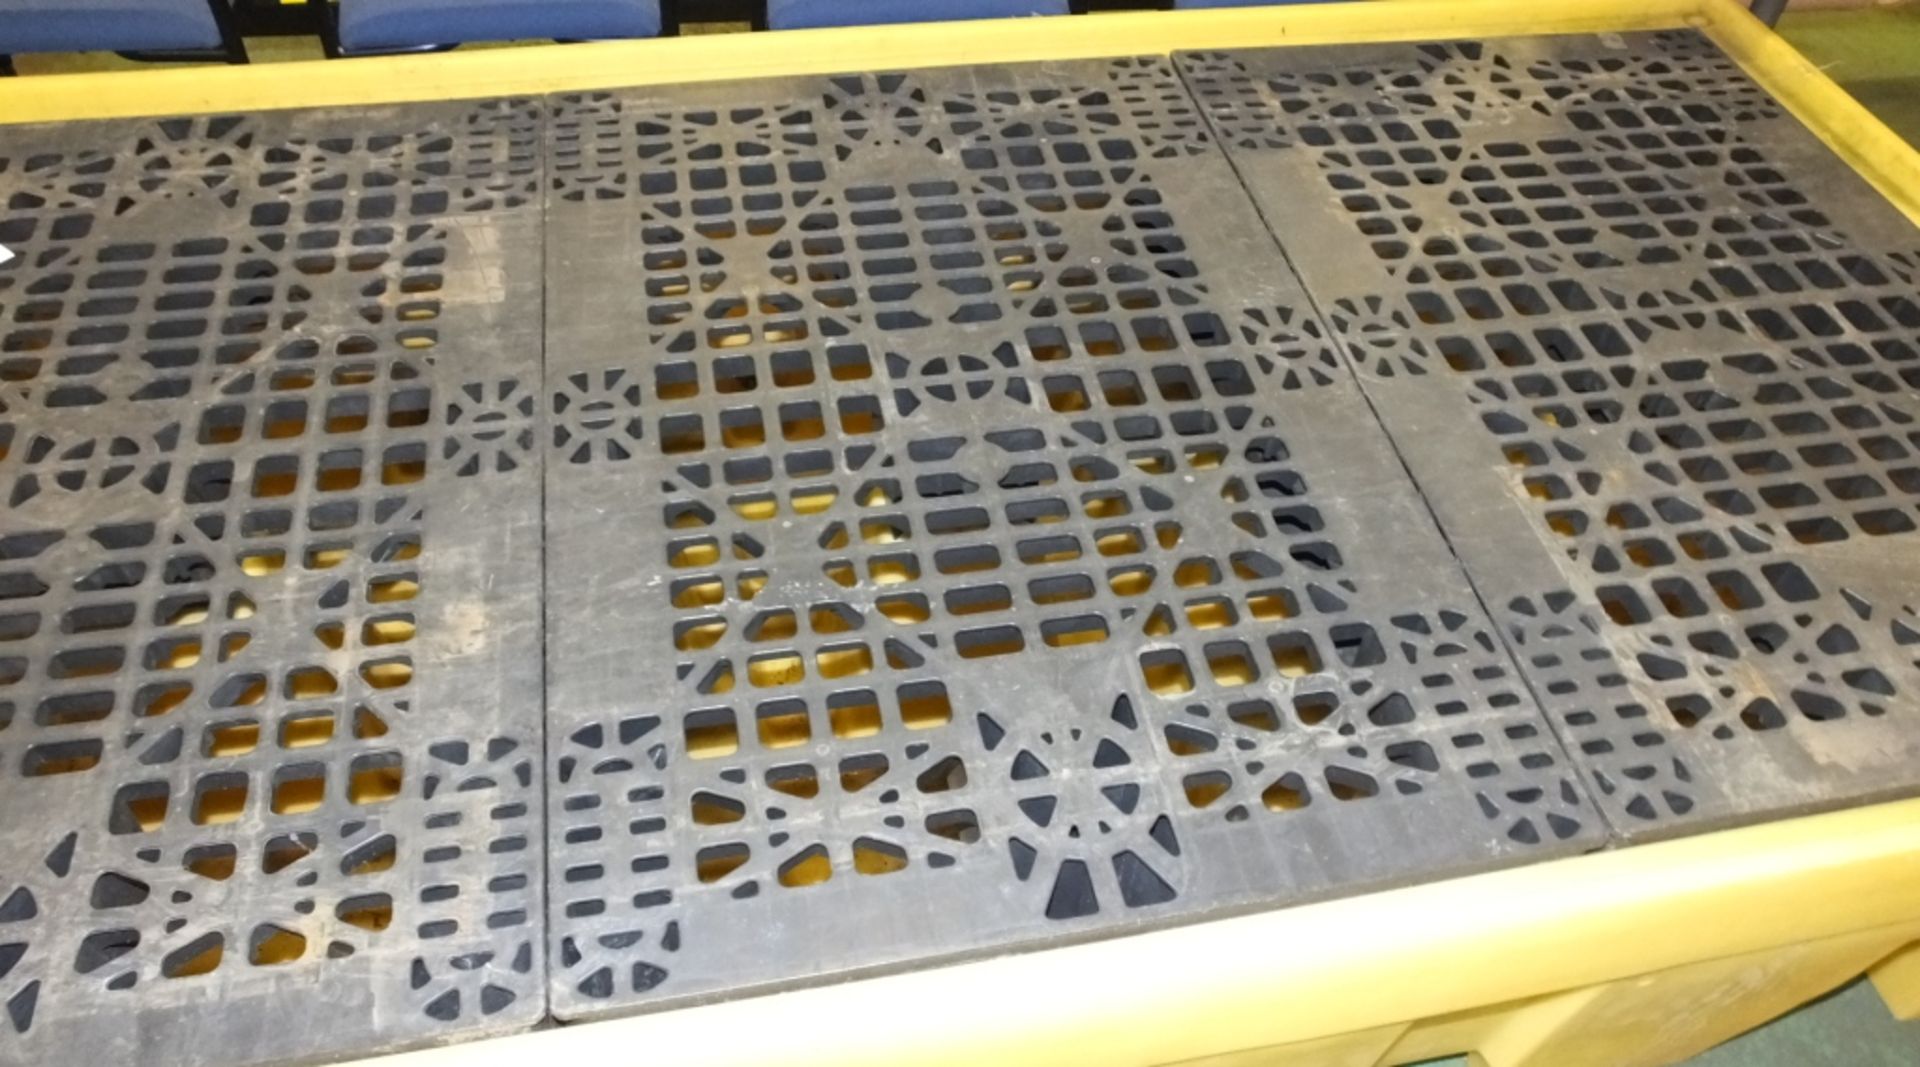 Large Industrial chemical spill tray with removable top sections - 2550 x 1350 x 520 - Image 2 of 4